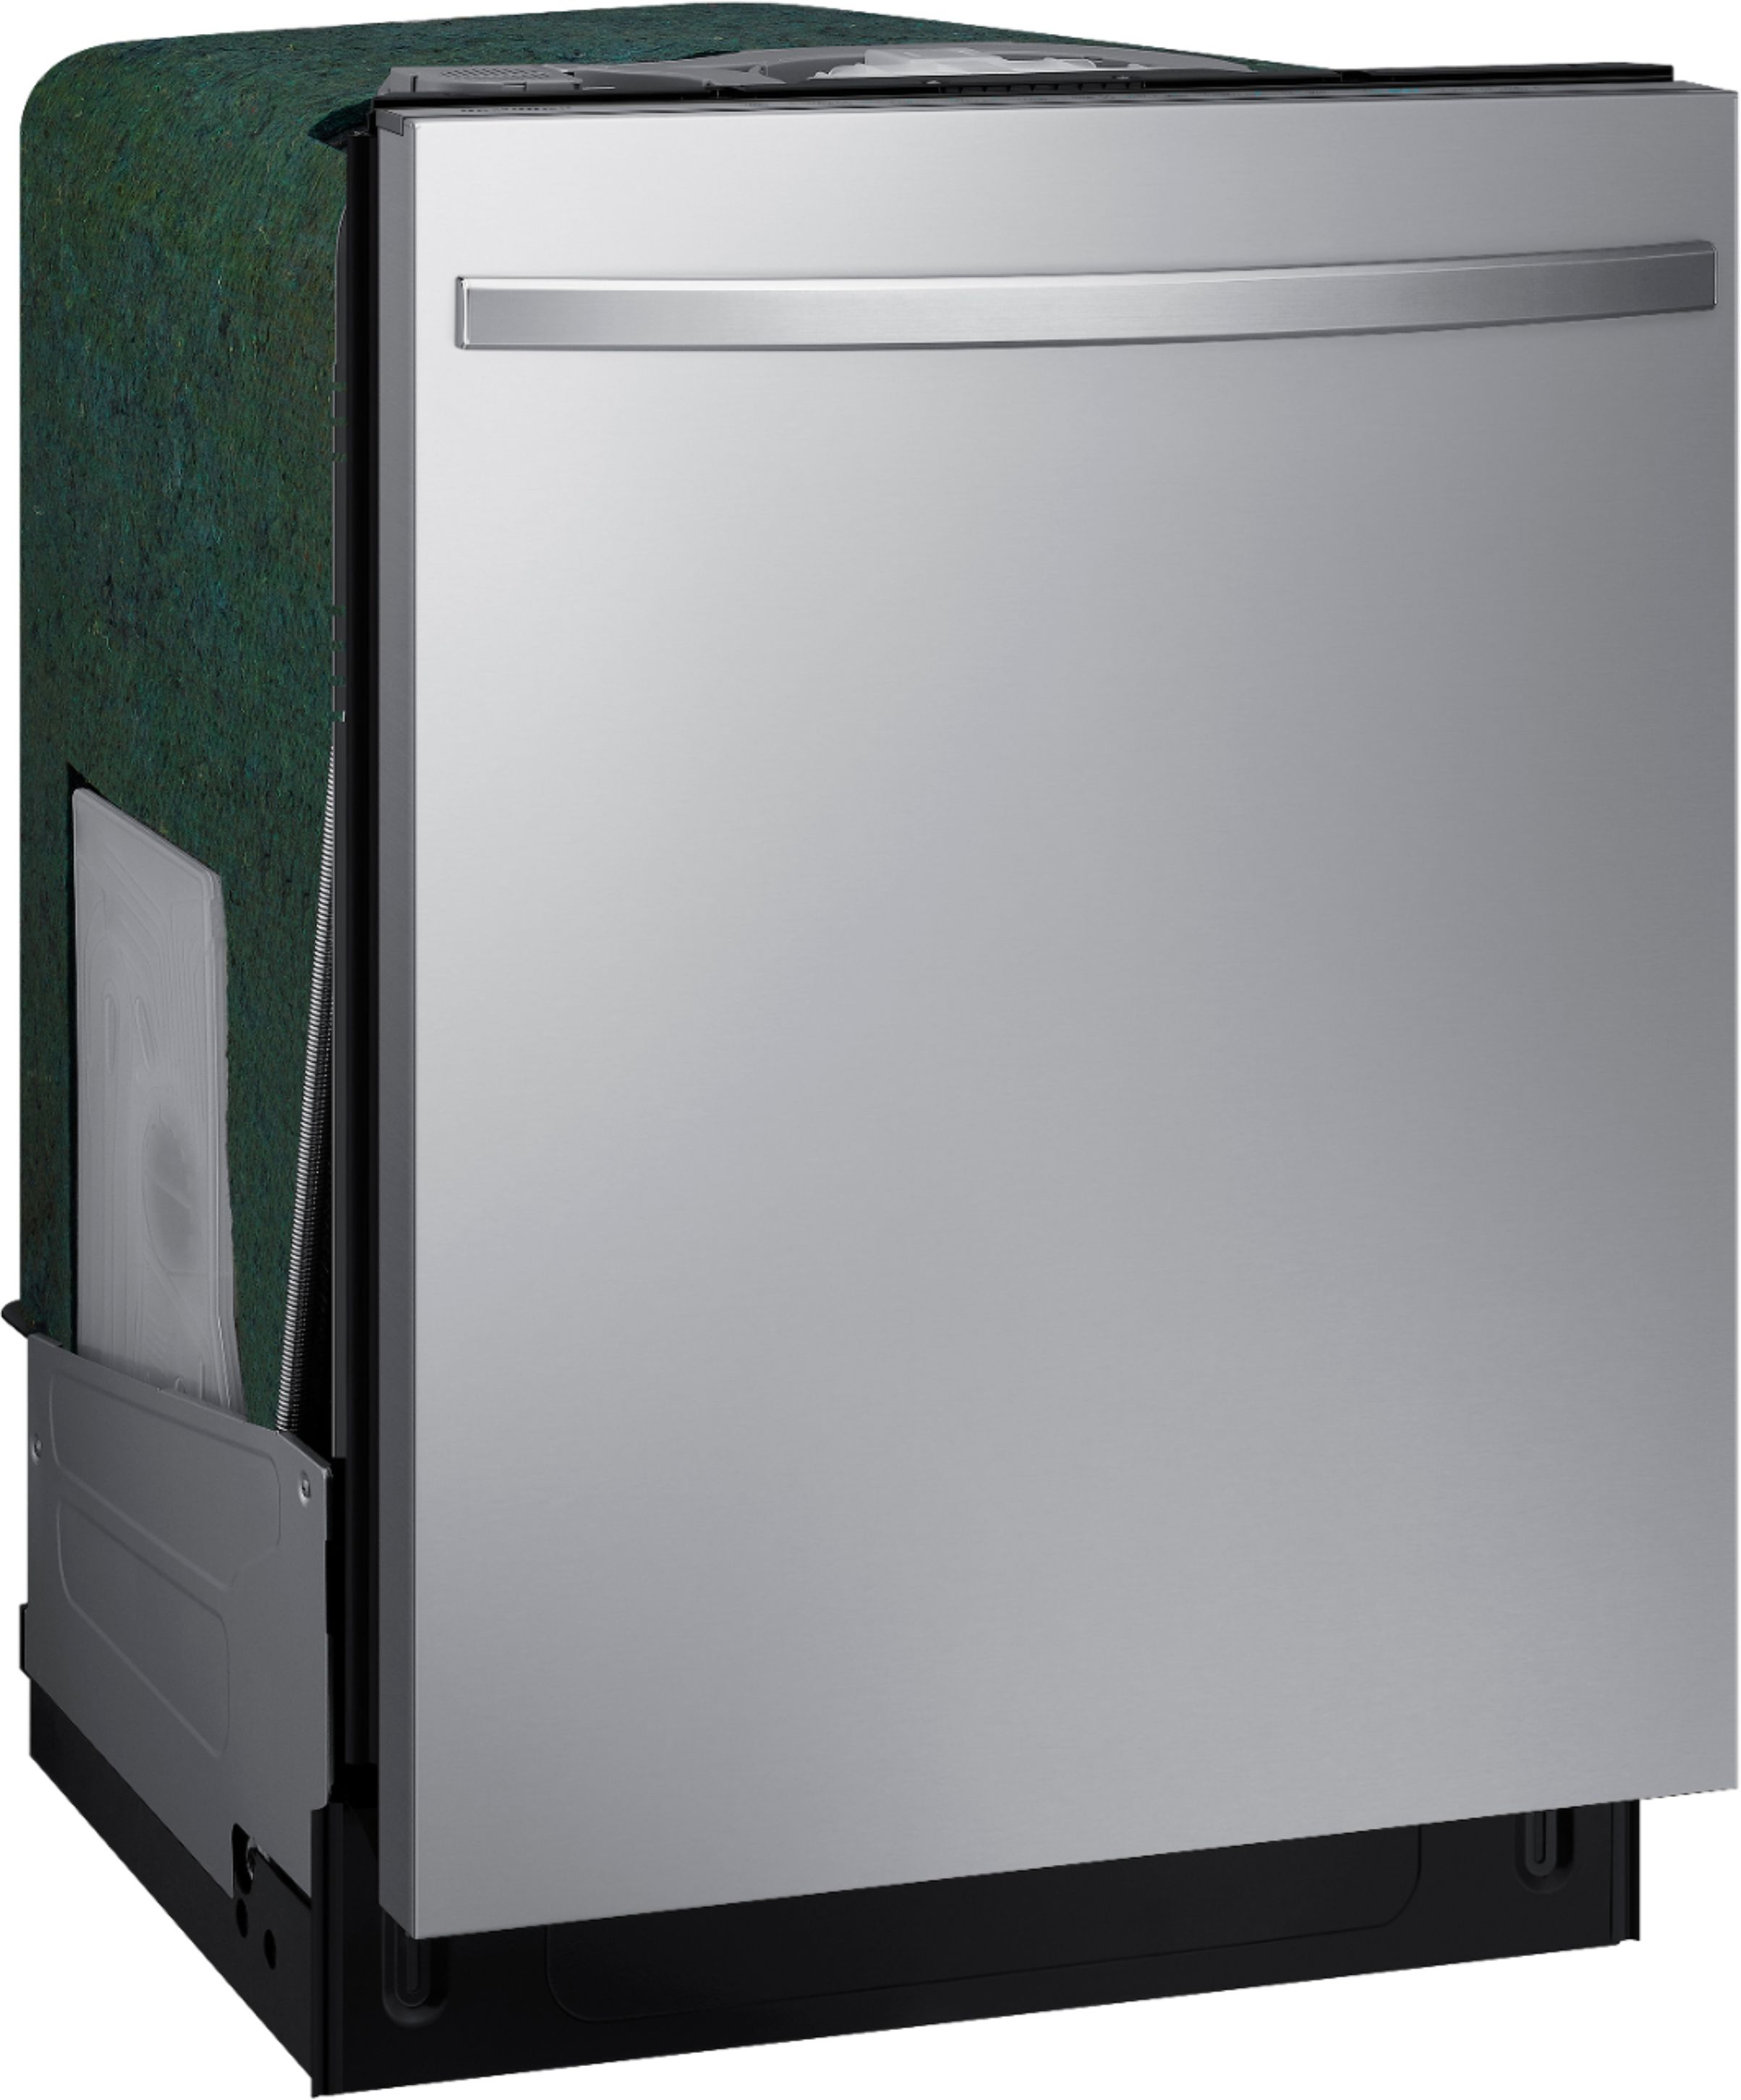 Angle View: SAMSUNG DW80R5061US StormWash(TM) 48 dBA Dishwasher in Stainless Steel